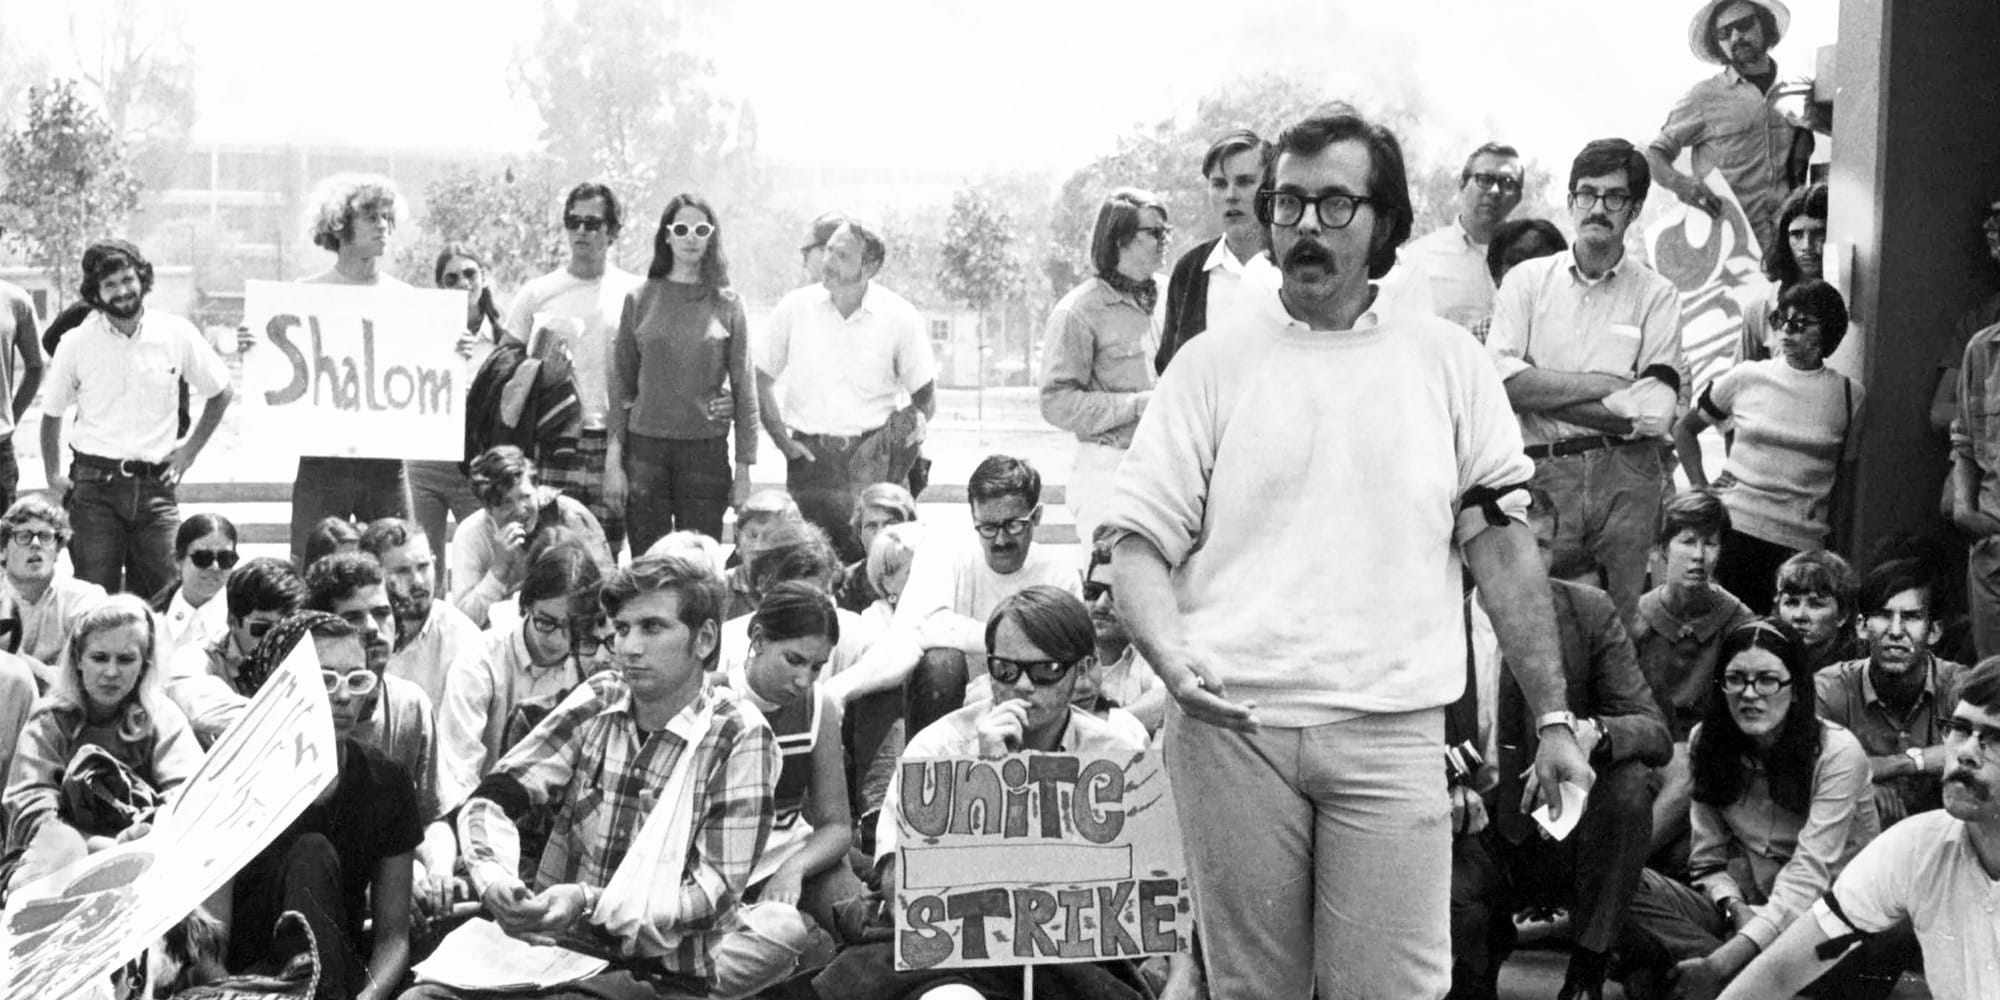 A protest held by UCR students on campus in 1969. 